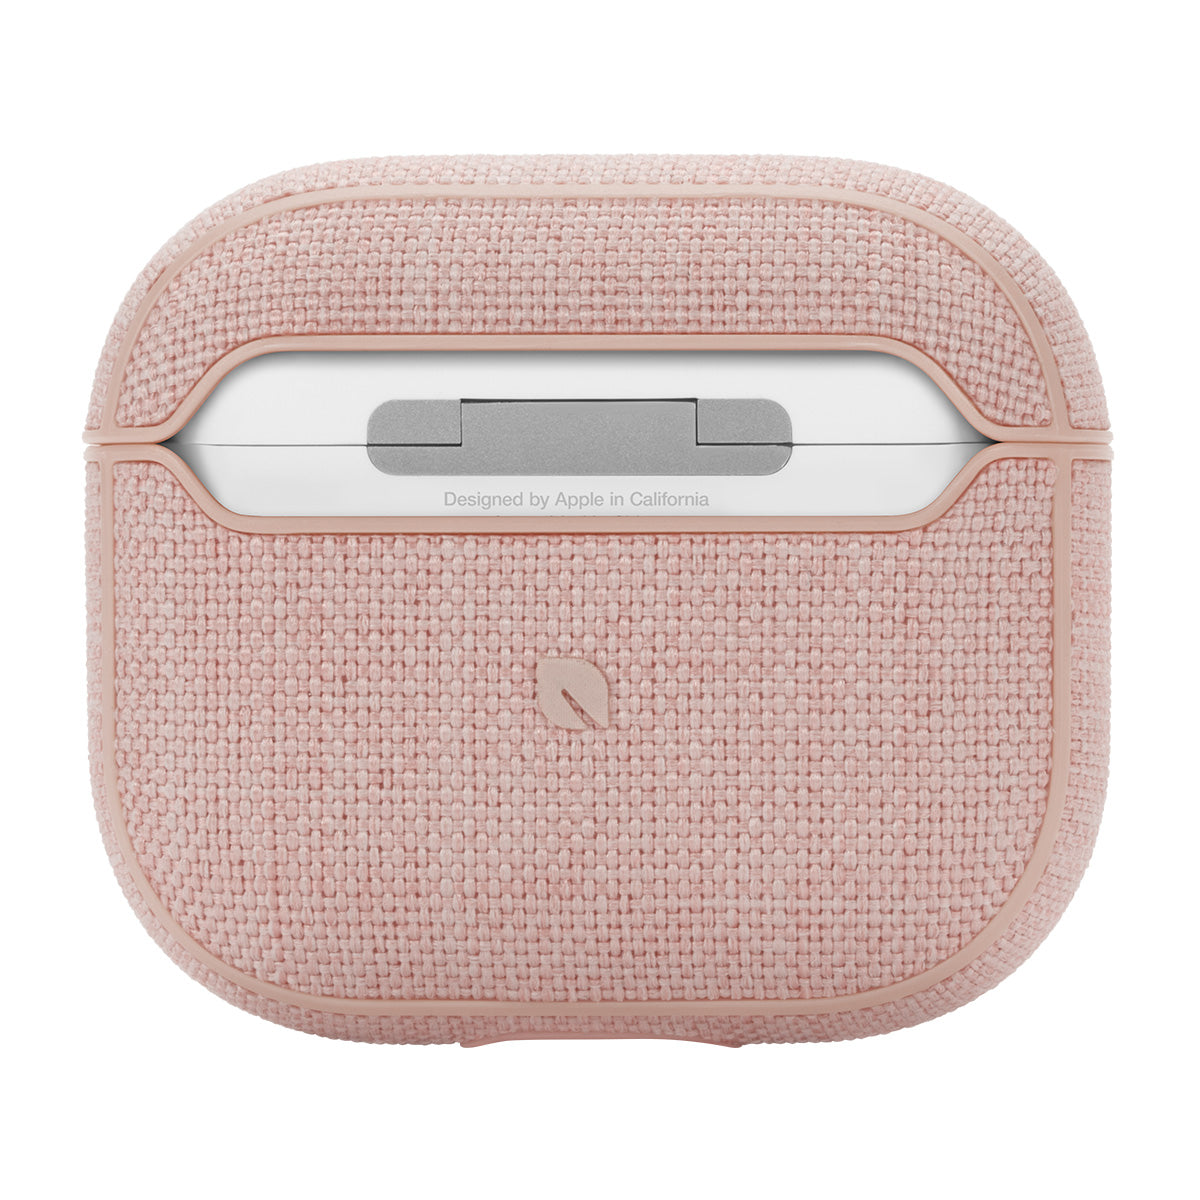 Incase Woolenex Case for AirPods (3rd Generation) - Pink - Education - Apple